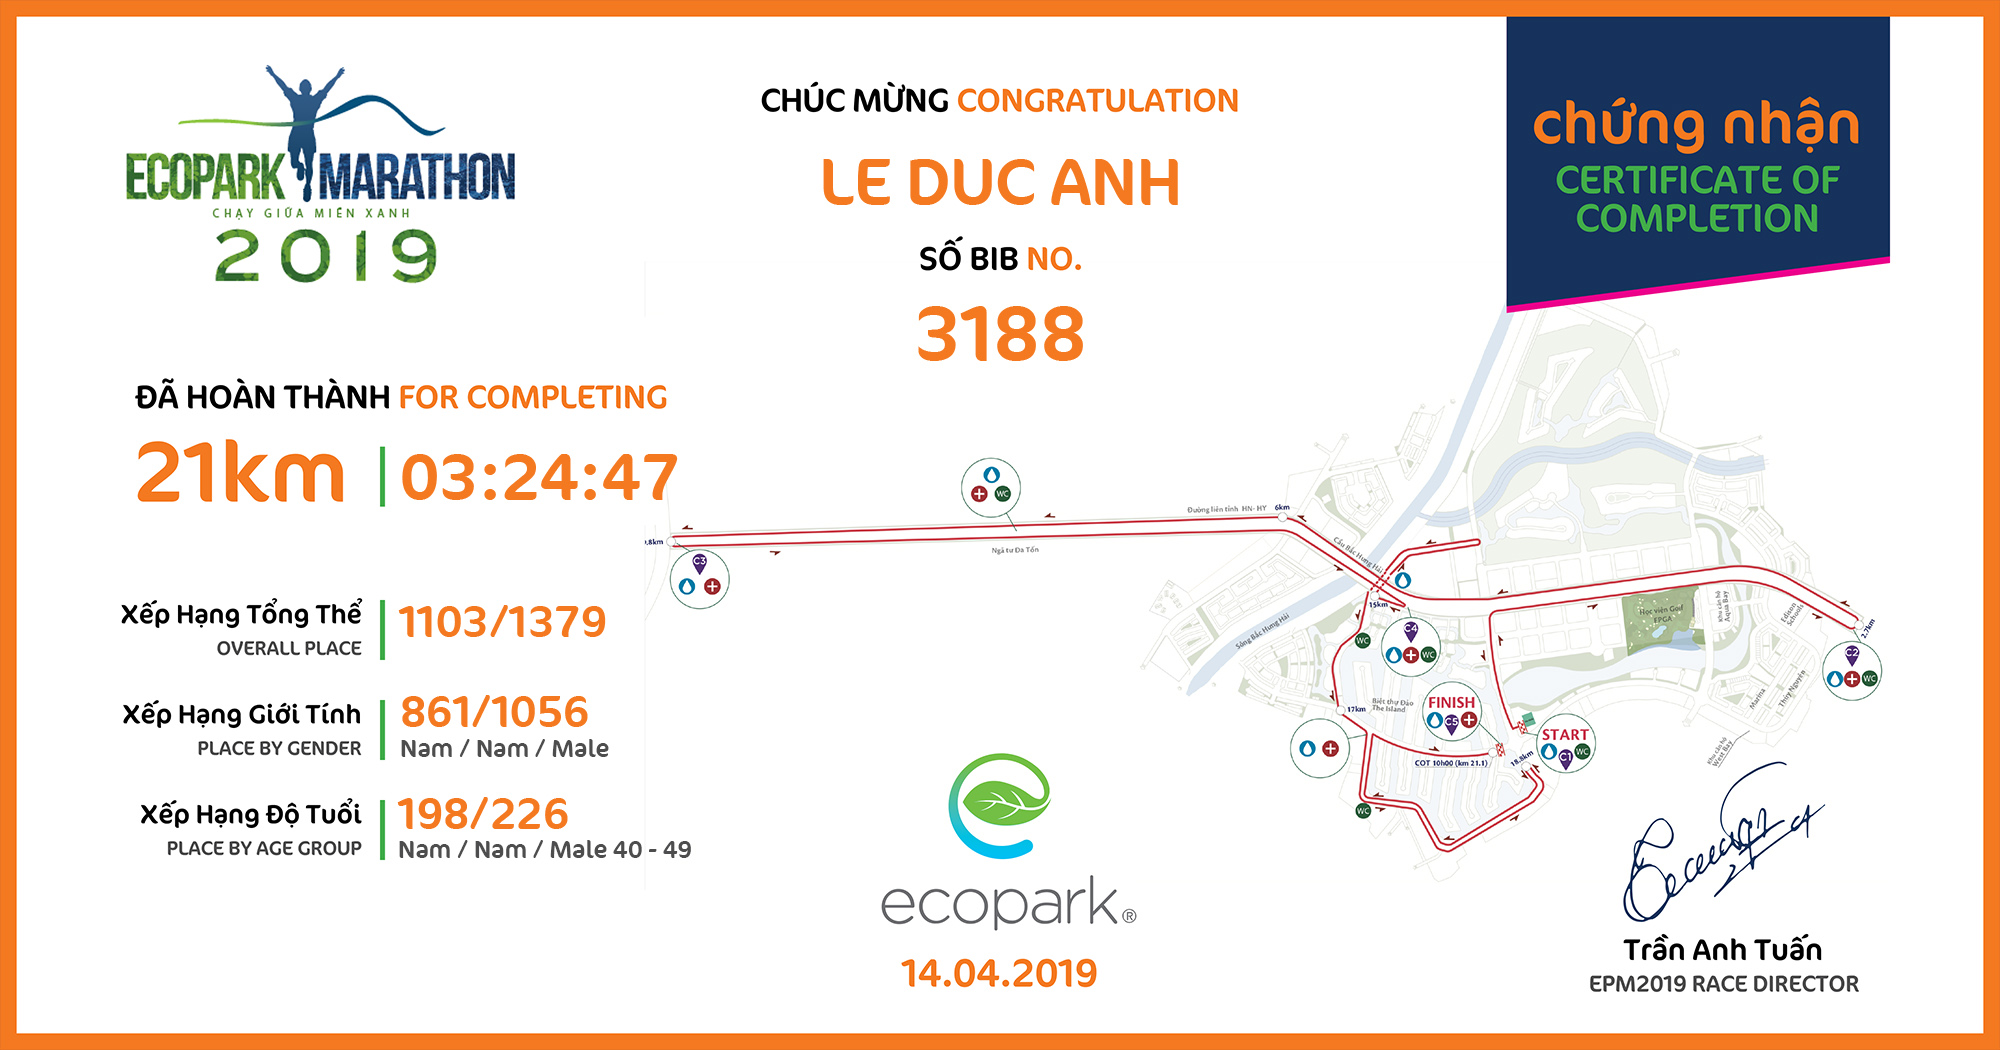 3188 - Le Duc Anh